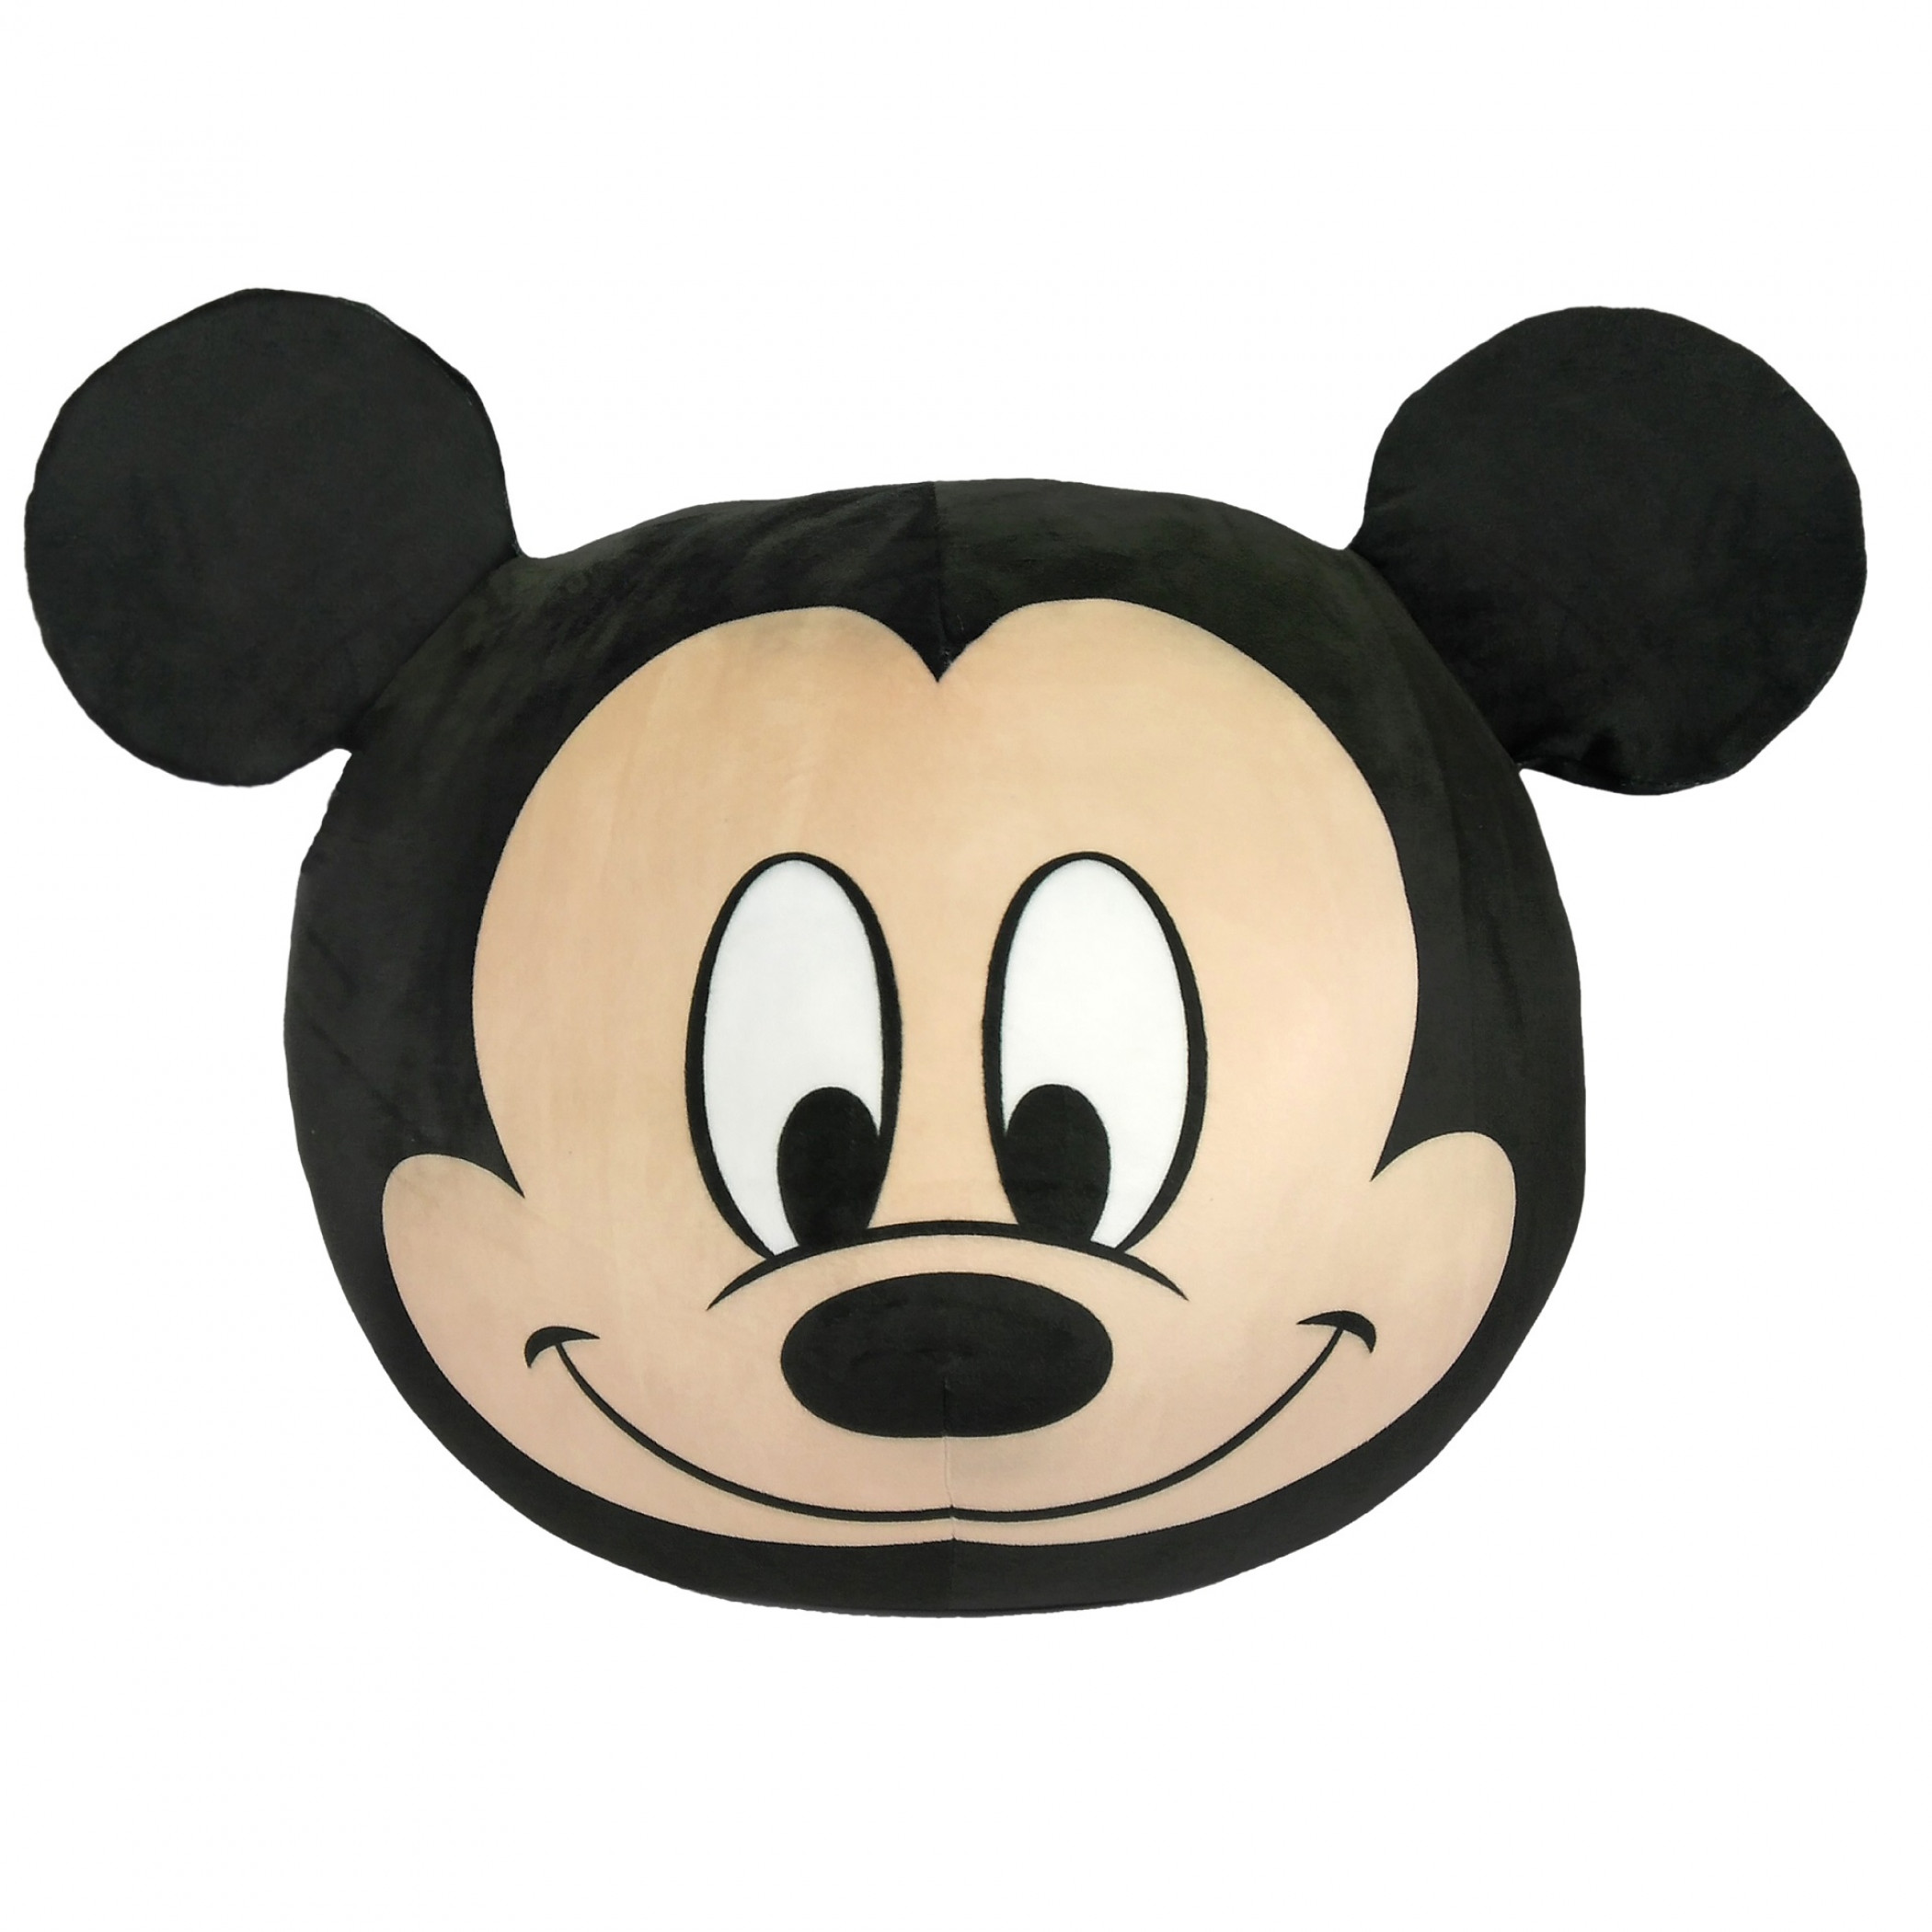 Disney Mickey Mouse Face 11" Round Cloud Pillow